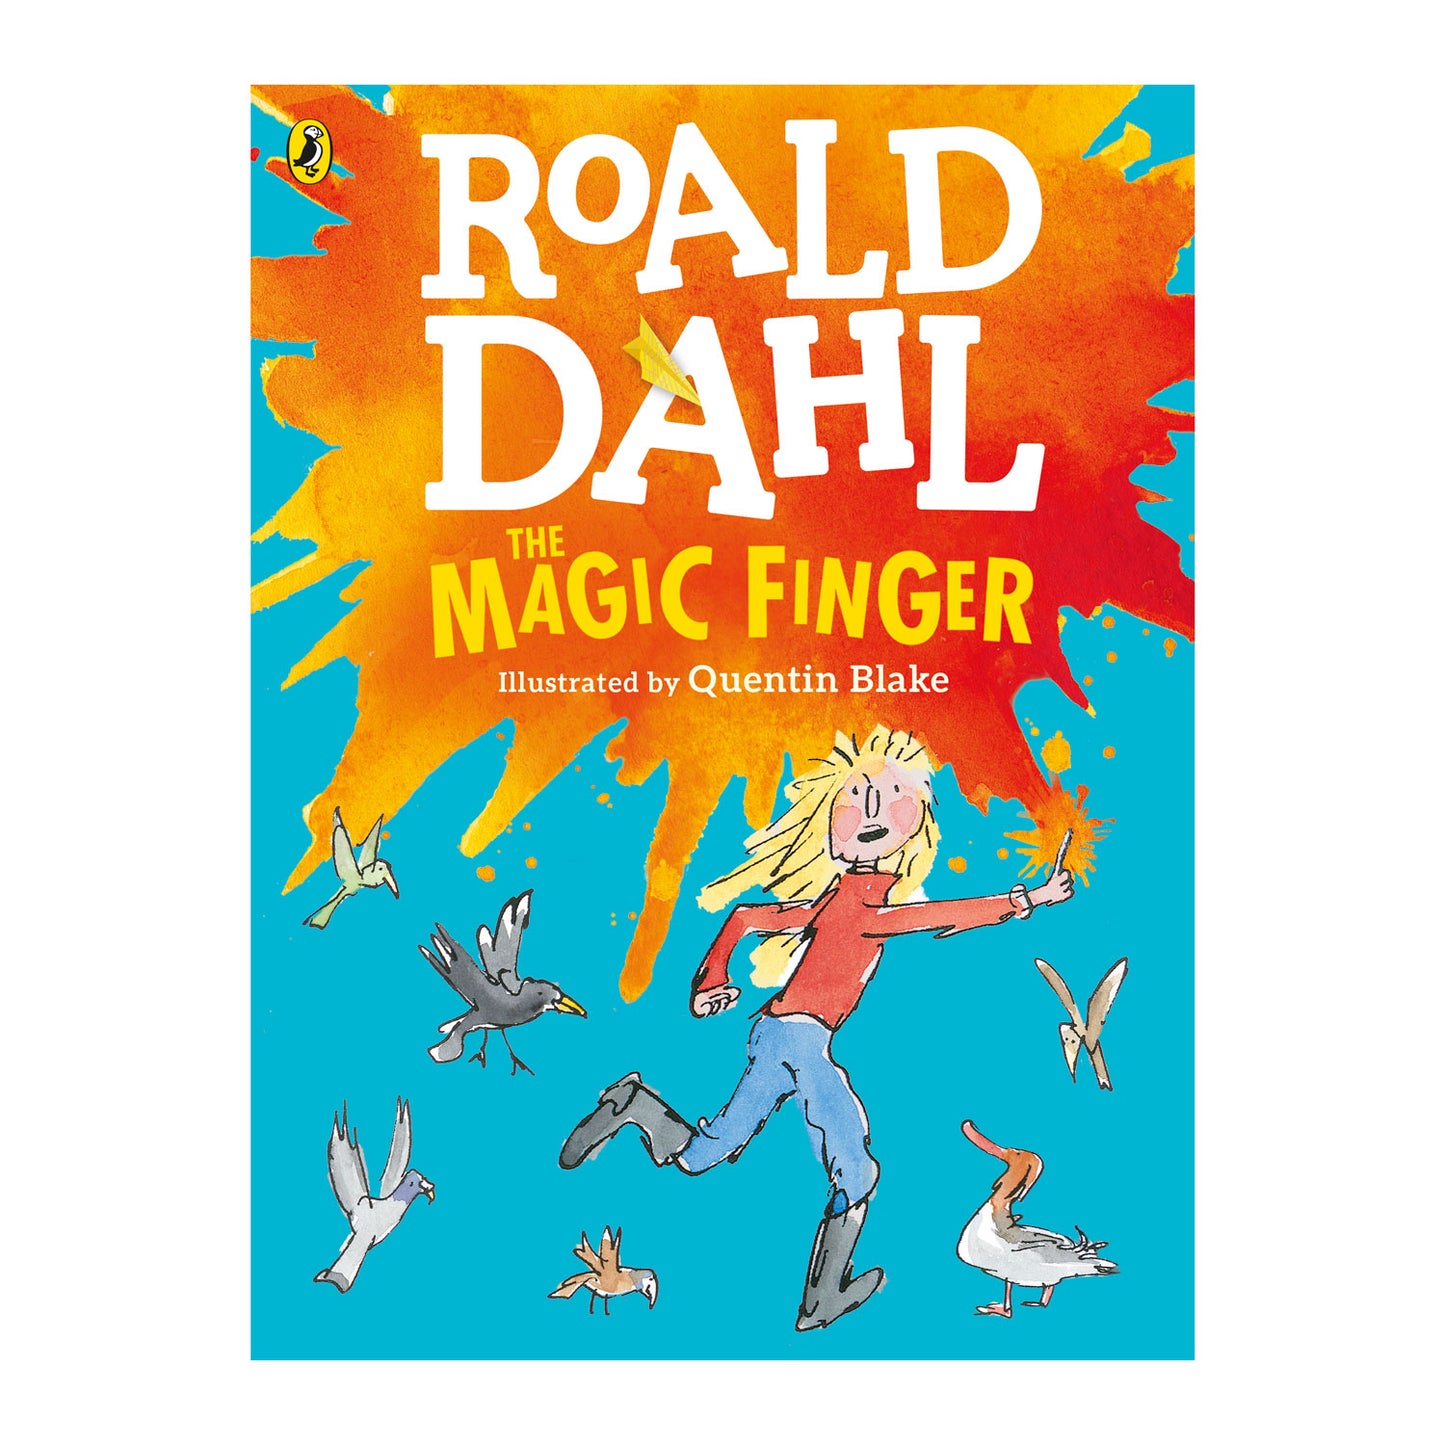 The Magic Finger by Roald Dahl with illustrations by Quentin Blake